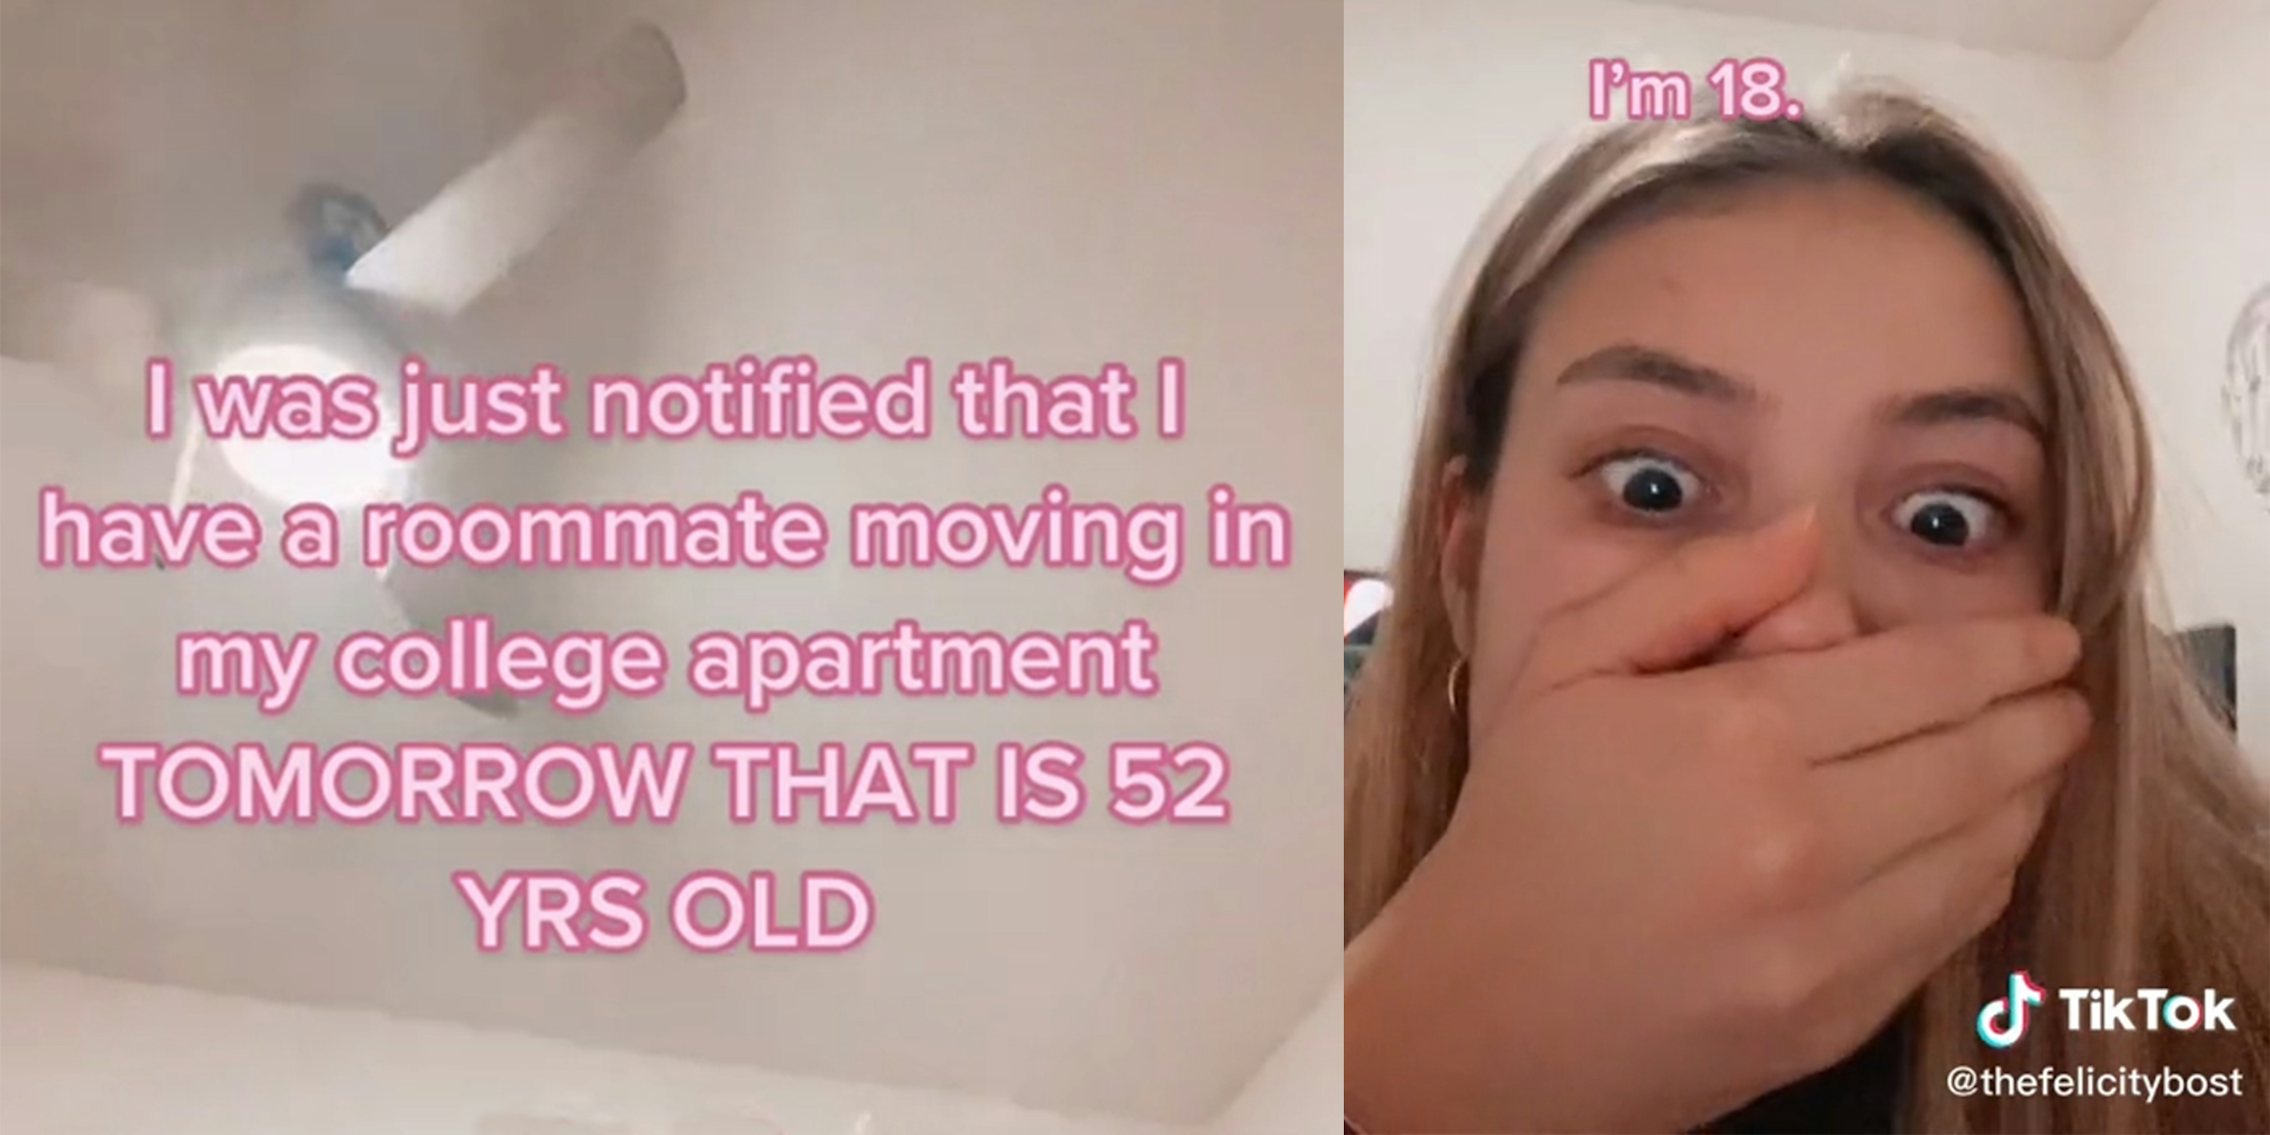 ceiling fan with caption 'I was just notified that I have a roommate moving in my college apartment TOMORROW THAT IS 52 YRS OLD' (l) young woman covering her mouth with wide eyes and caption 'i'm 18' (r)